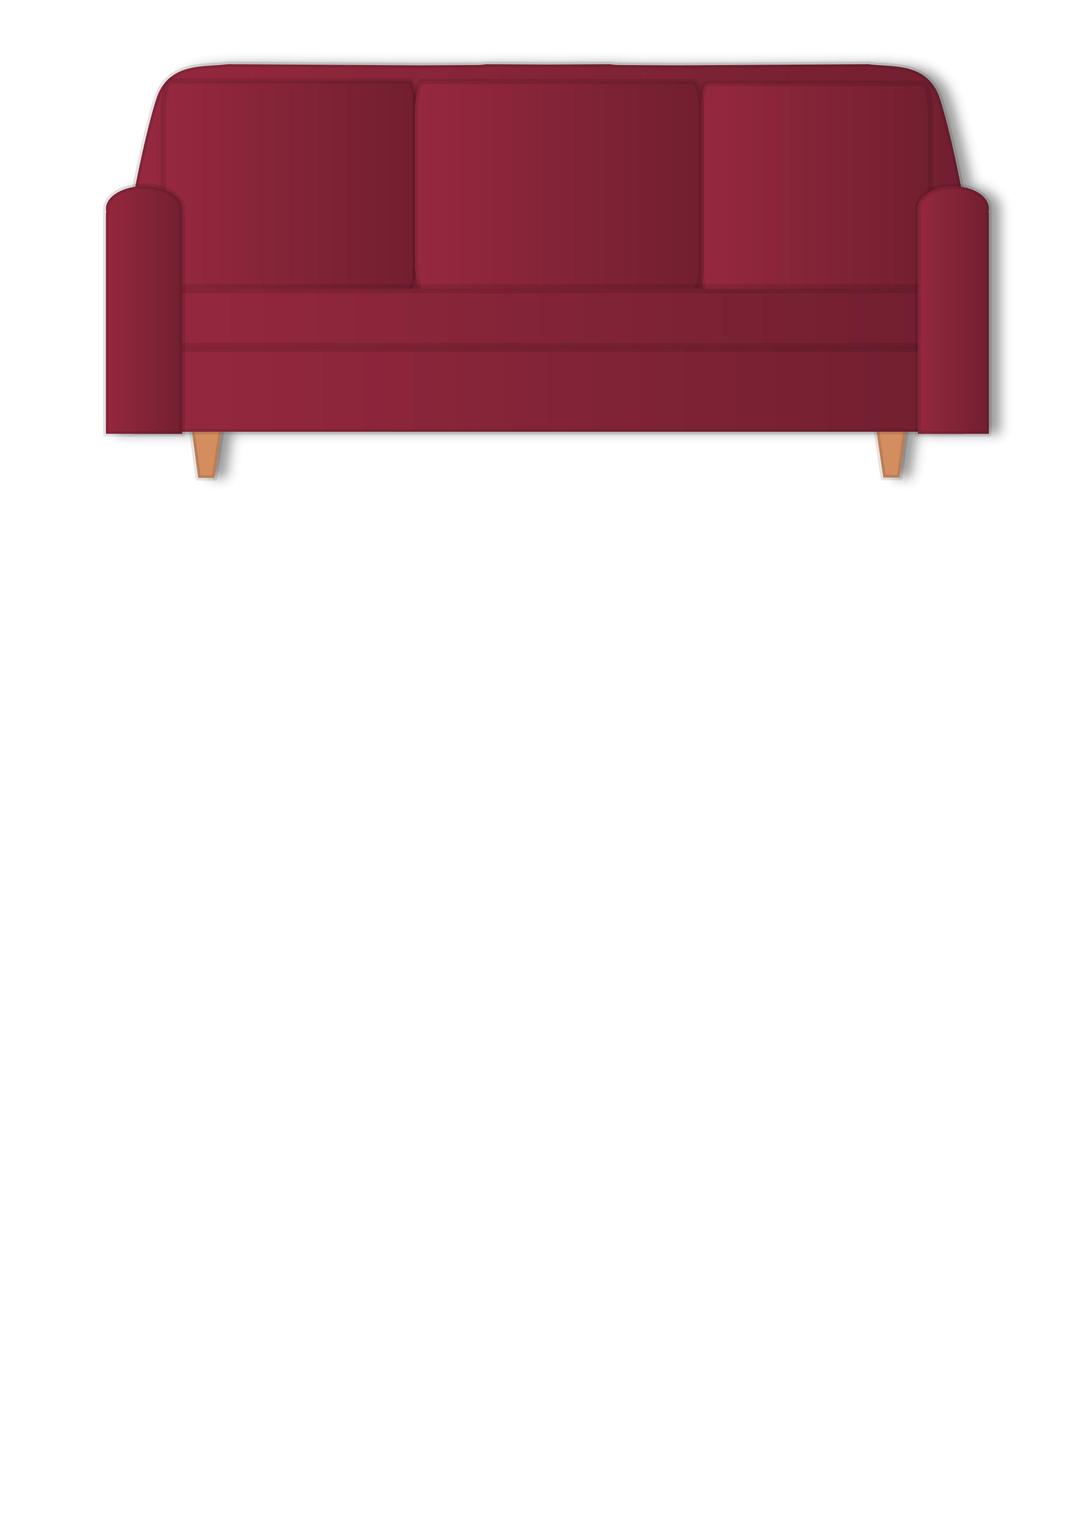 Red Couch png transparent